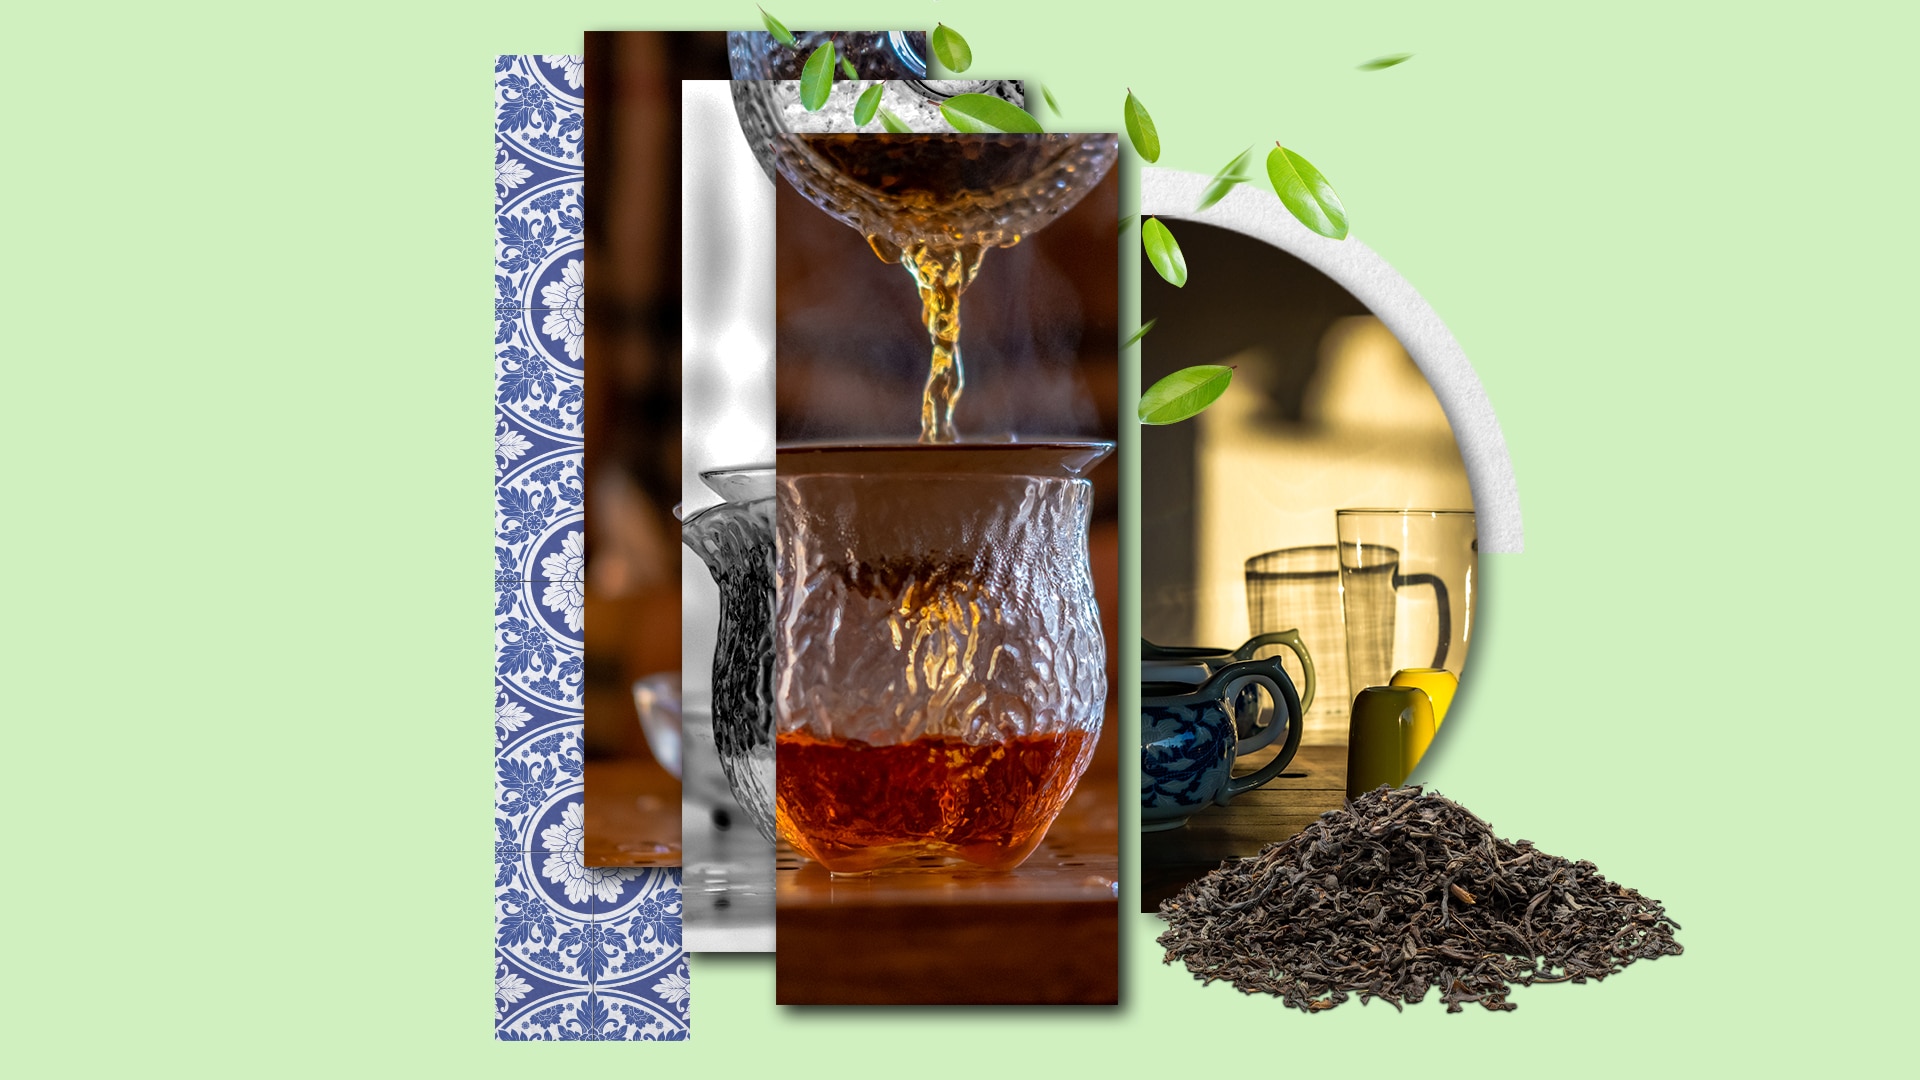 An edited image of tea being poured with a green background.